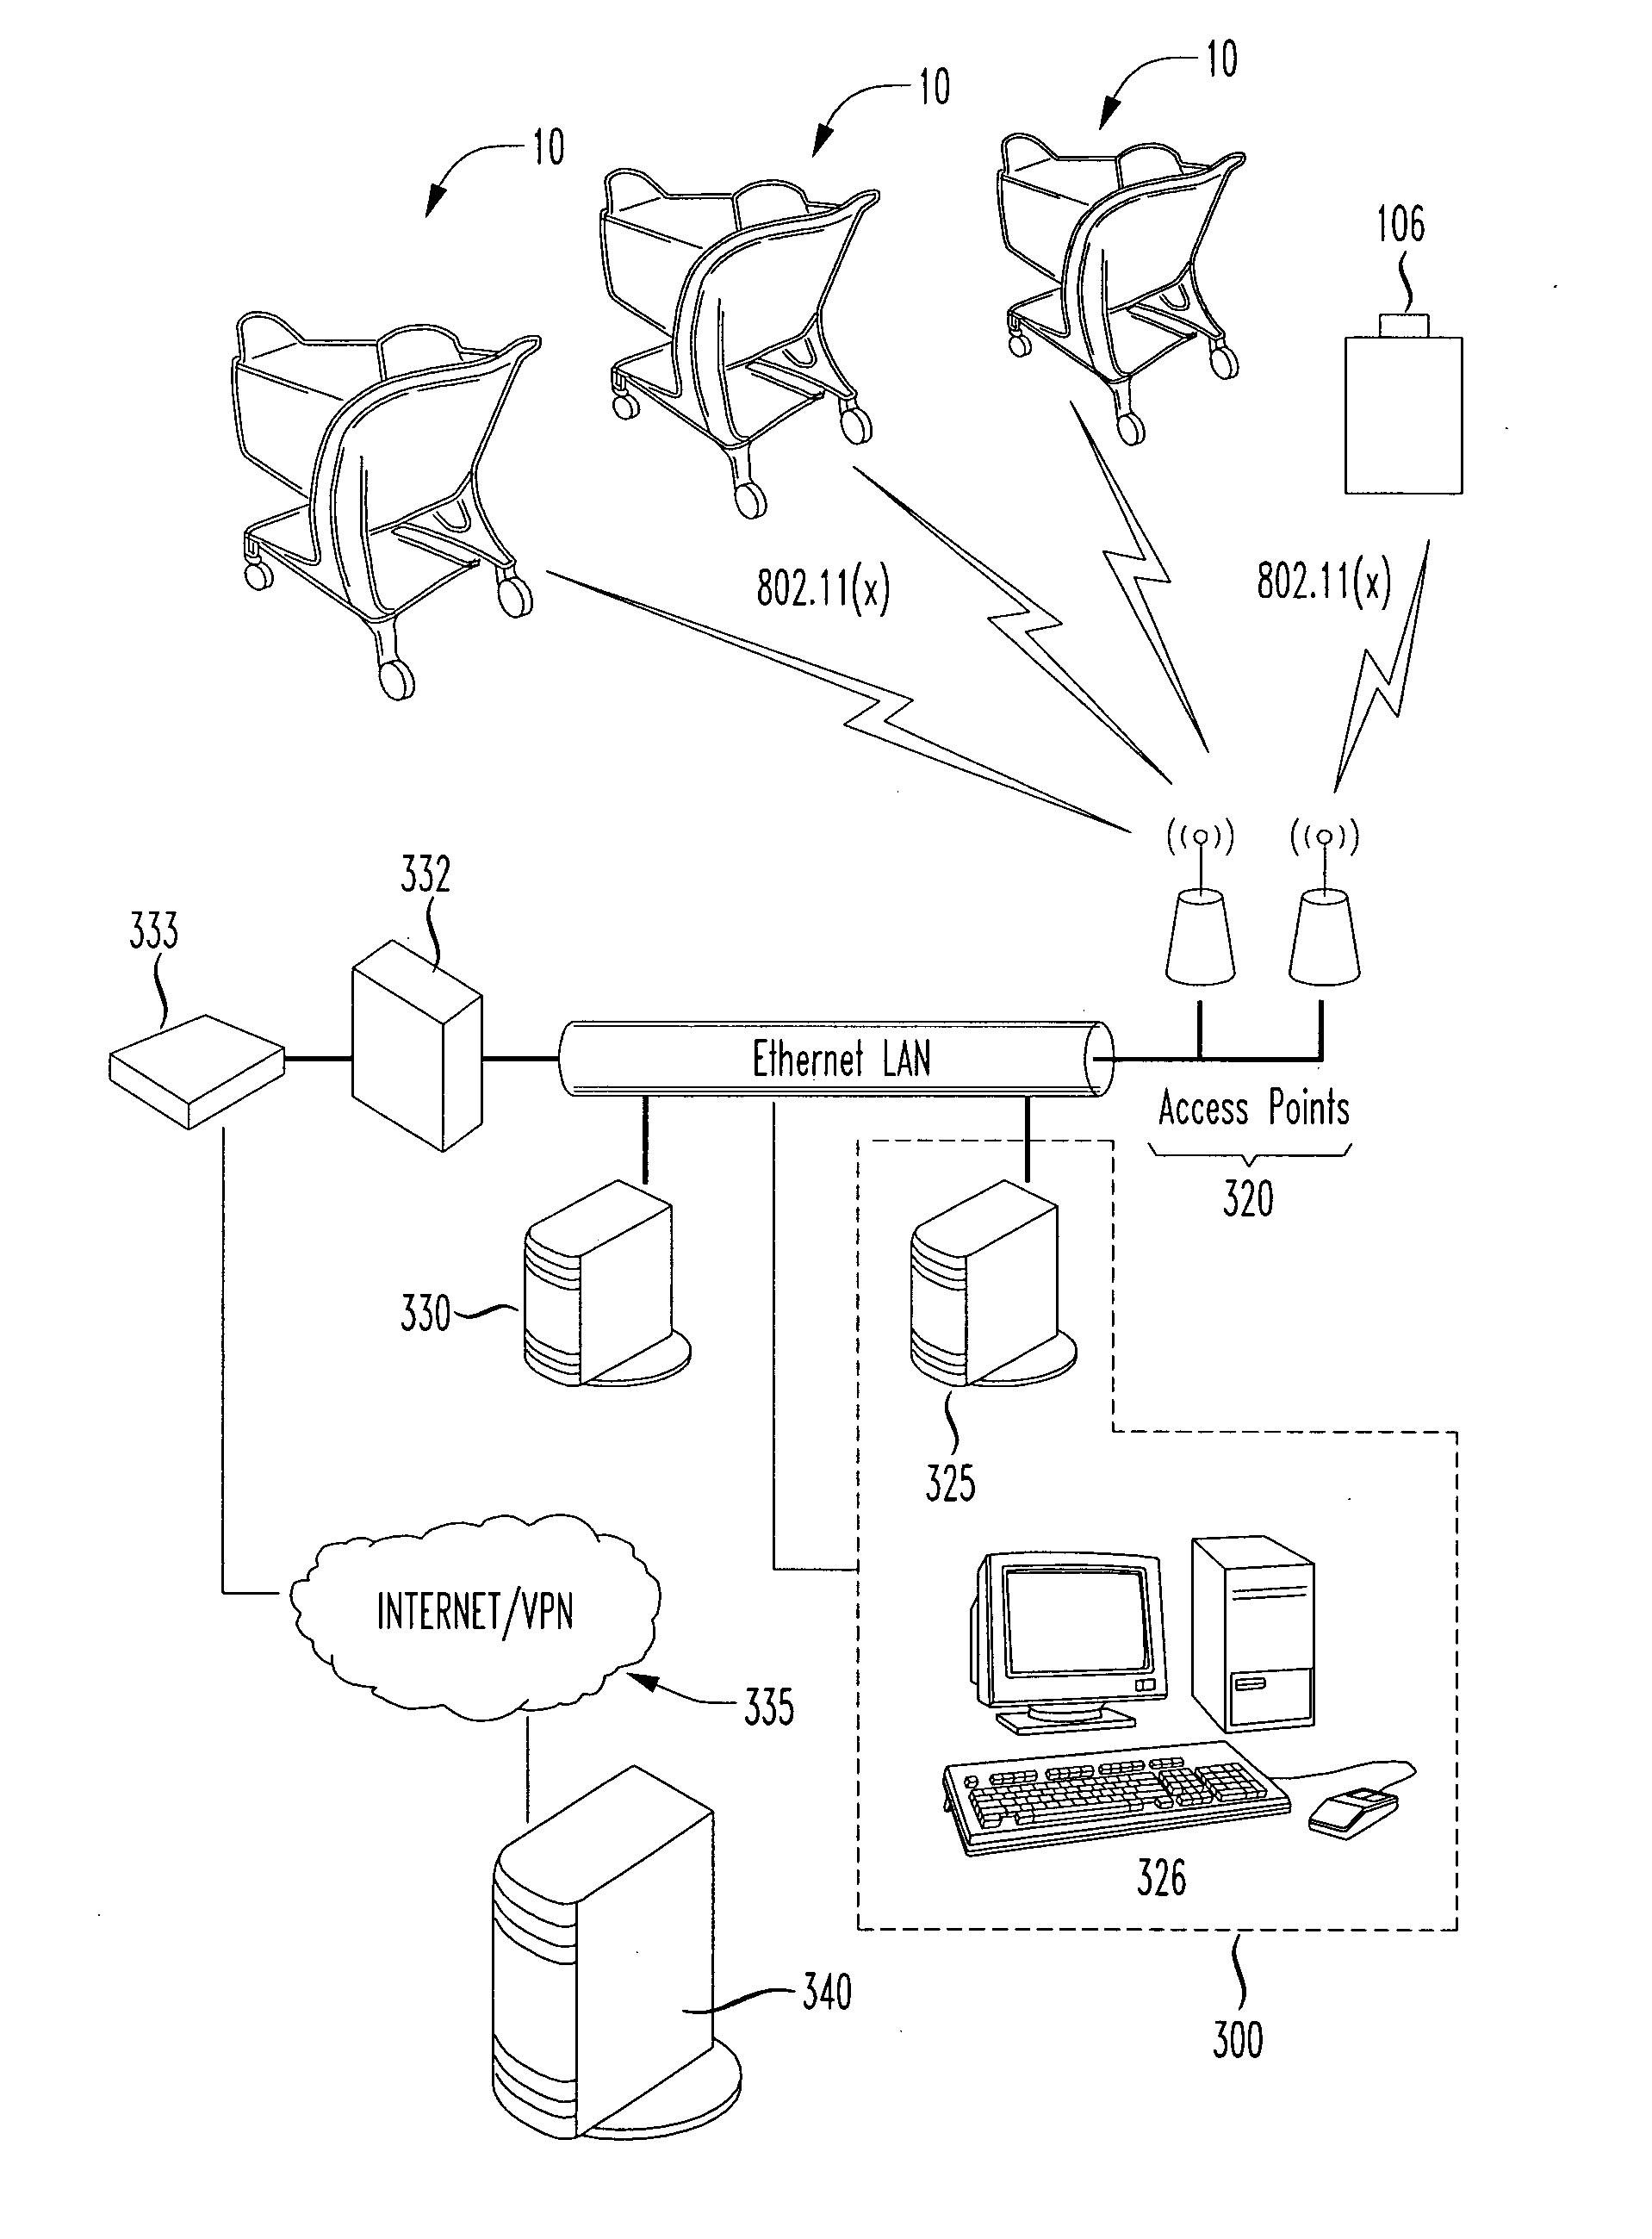 Media enabled shopping cart system with basket inventory